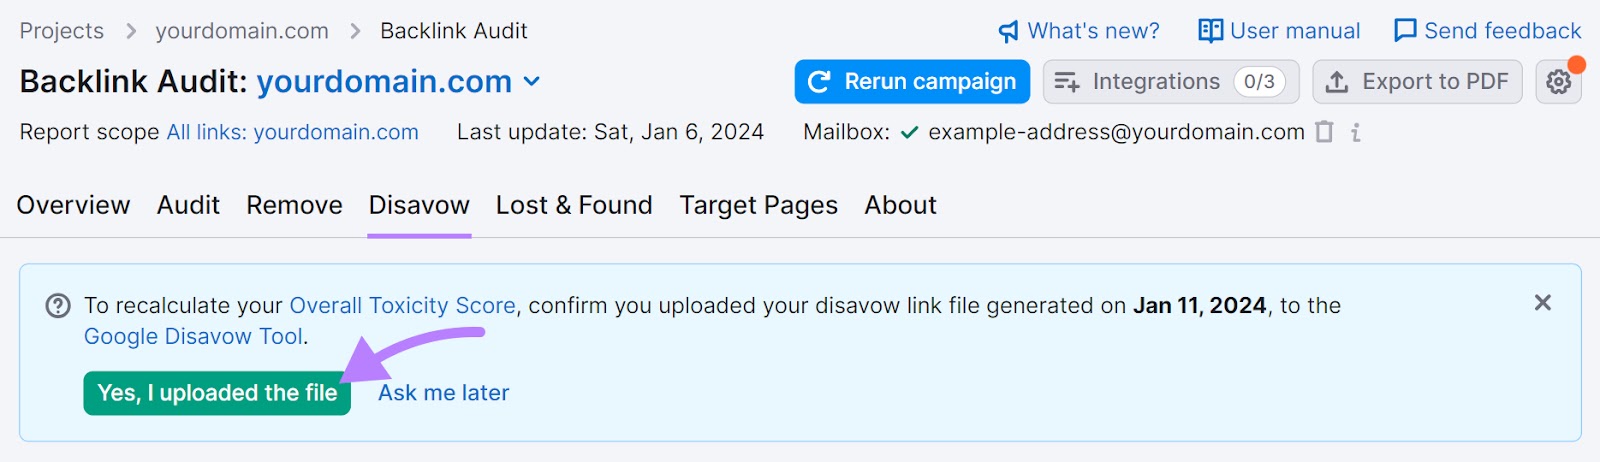 “Yes, I uploaded the file" fastener  highlighted successful  Backlink Audit tool